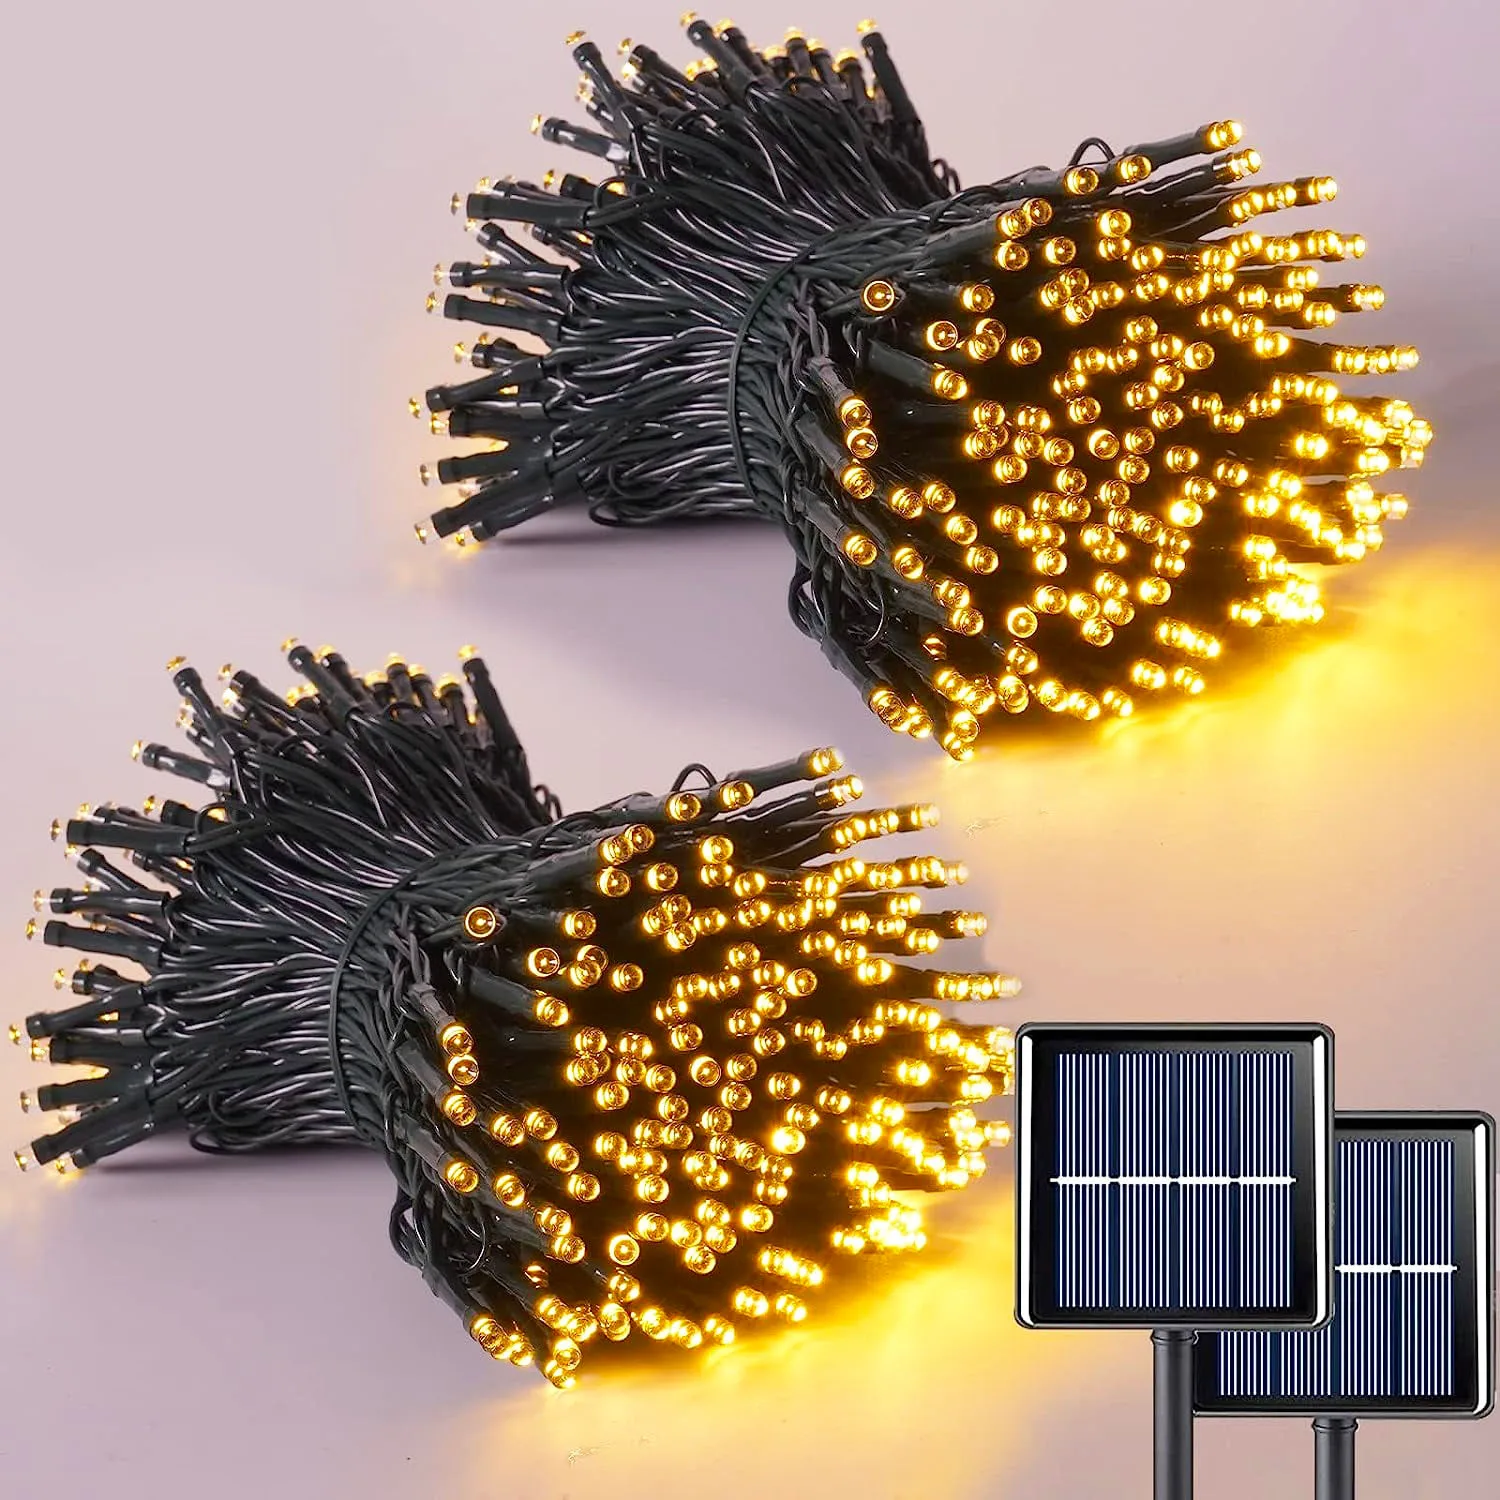 2Pack Solar String Lights Outdoor Waterproof Fairy Christmas Twinkle Lights with 8 Modes Tree Lights for Outdoor Garden Patio solar led lighted patio umbrella waterproof solar umbrella with 104 solar led lights cantilever hanging umbrella with 8 modes